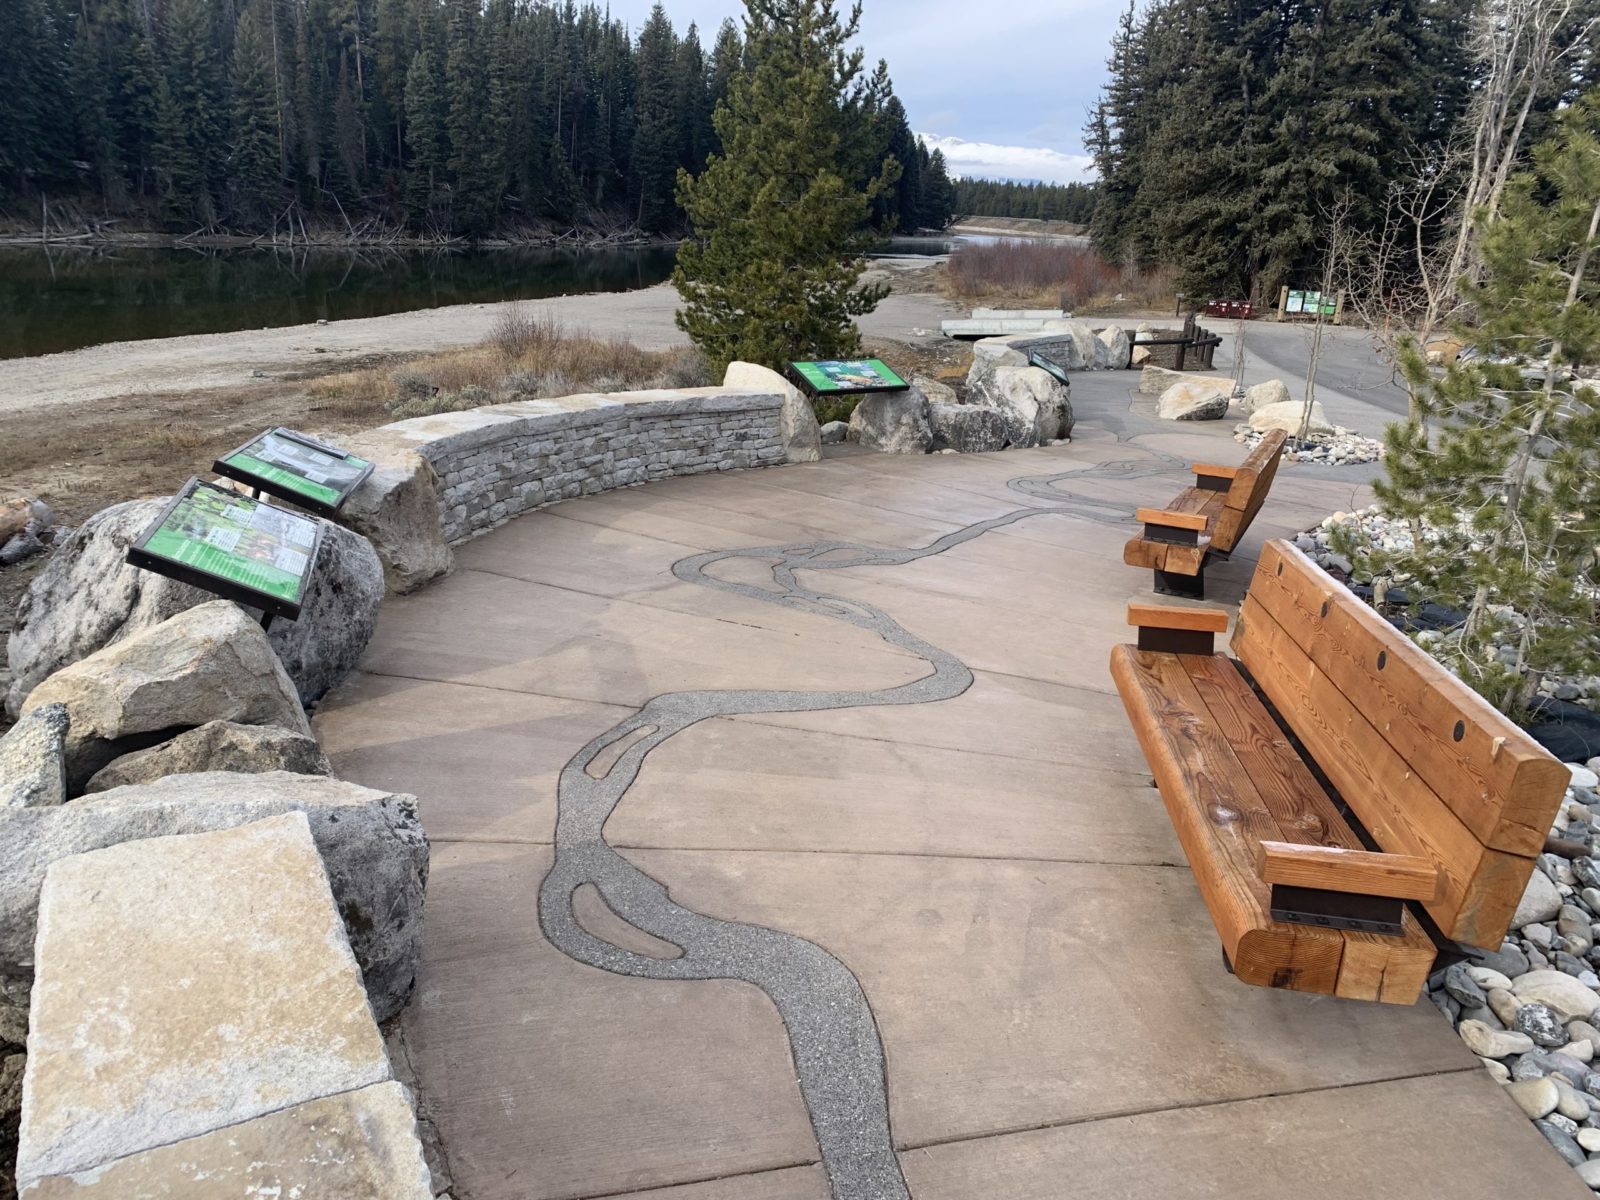 Newly constructed stone walls and wooden benches now welcome users of all types to the overlook at Pacific Creek.